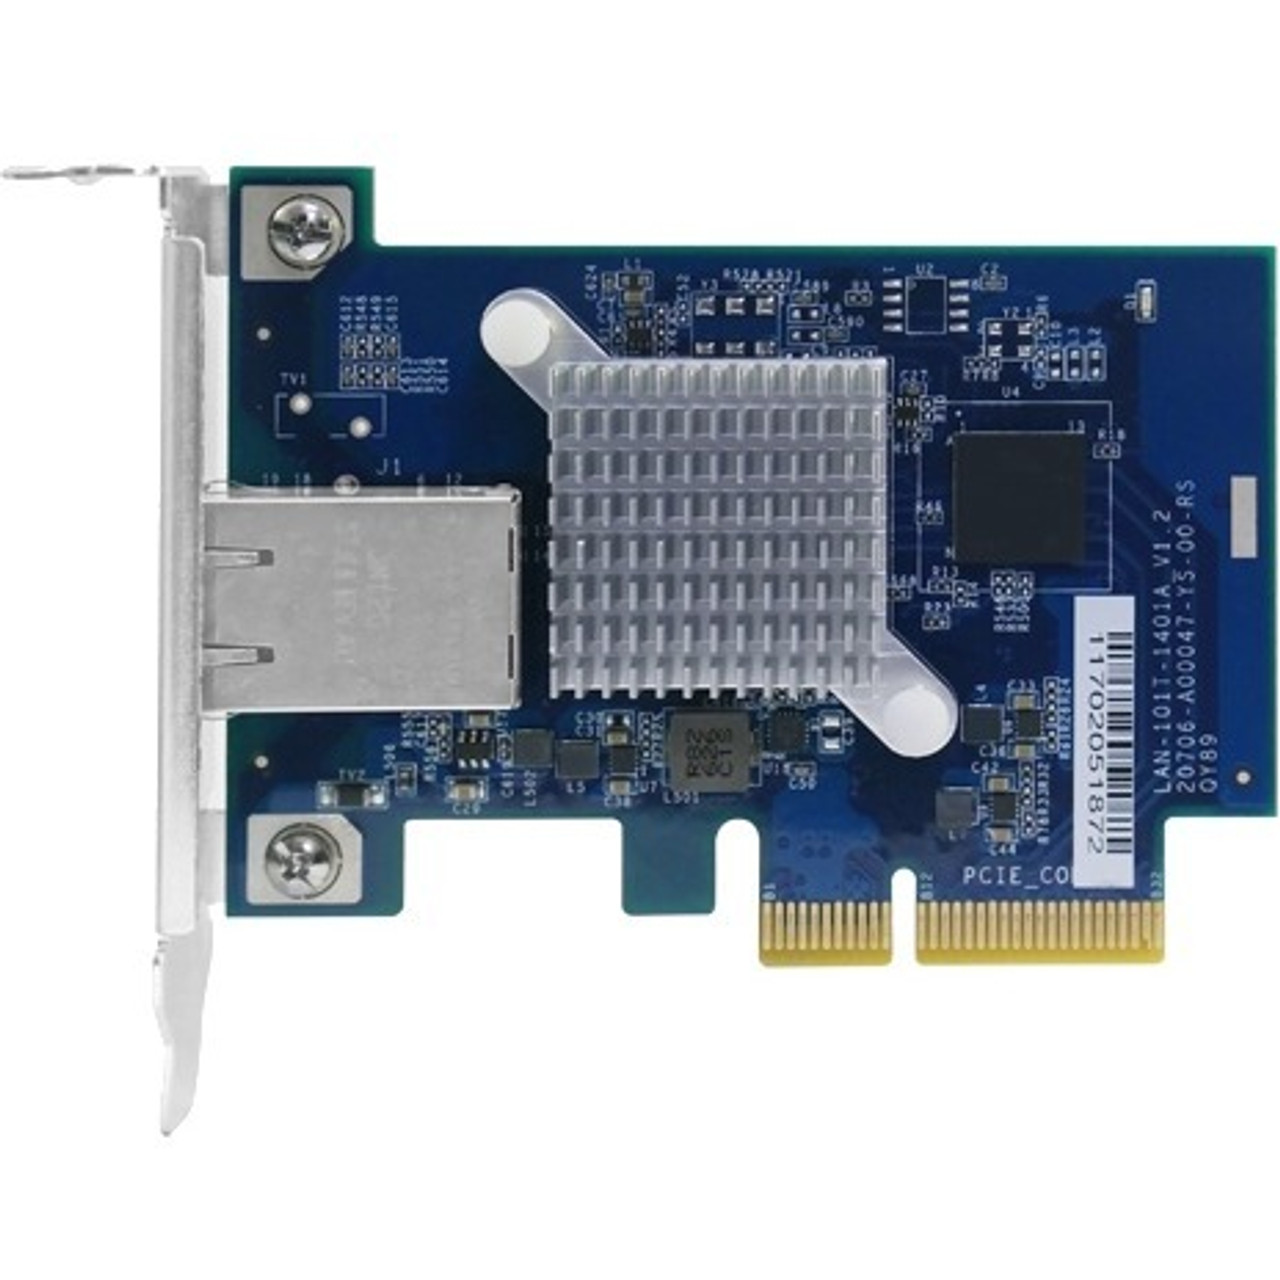 LAN-10G1TA QNAP Single-Port (10GBase-T) 10GBe Network Expansion Card, PCIE GEN2 X4 PCI Express 2.0 x4 1 Port(s) 1 Twisted Pair